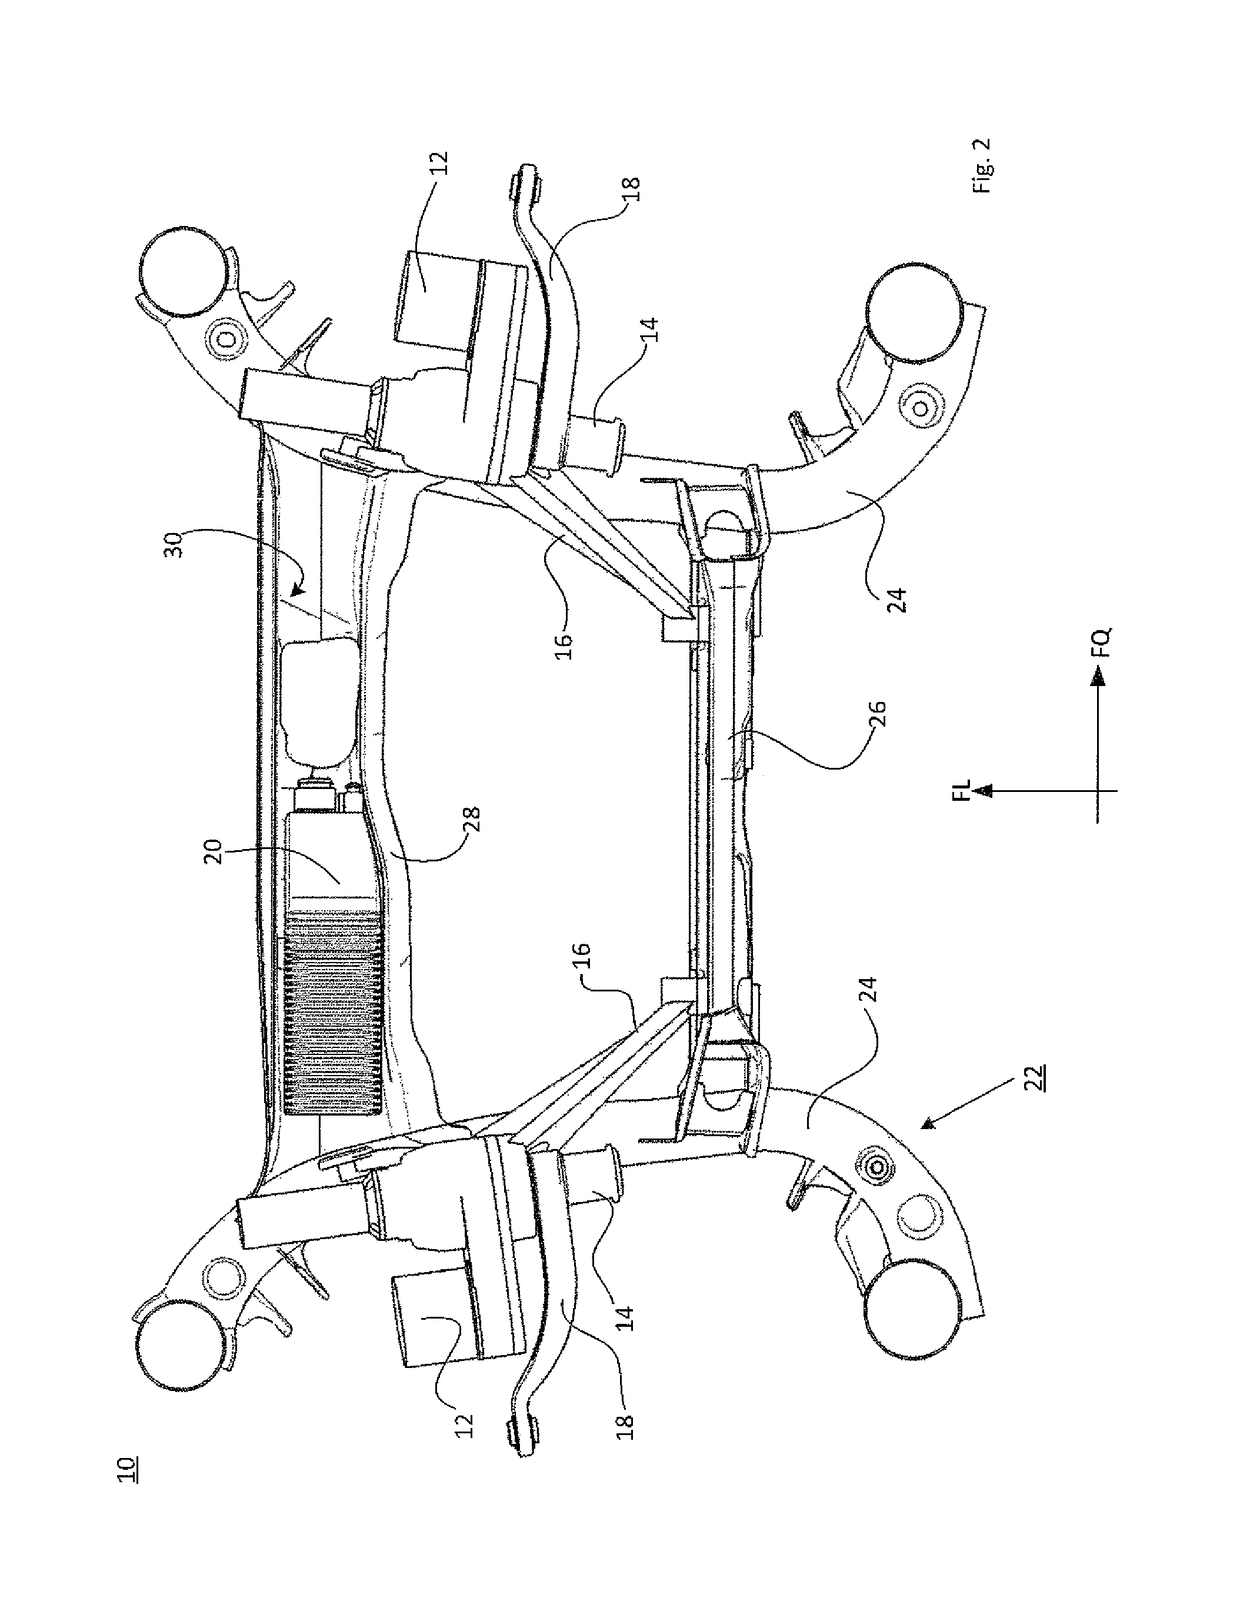 Actively adjustable wheel suspension for the wheels of an axle of a motor vehicle